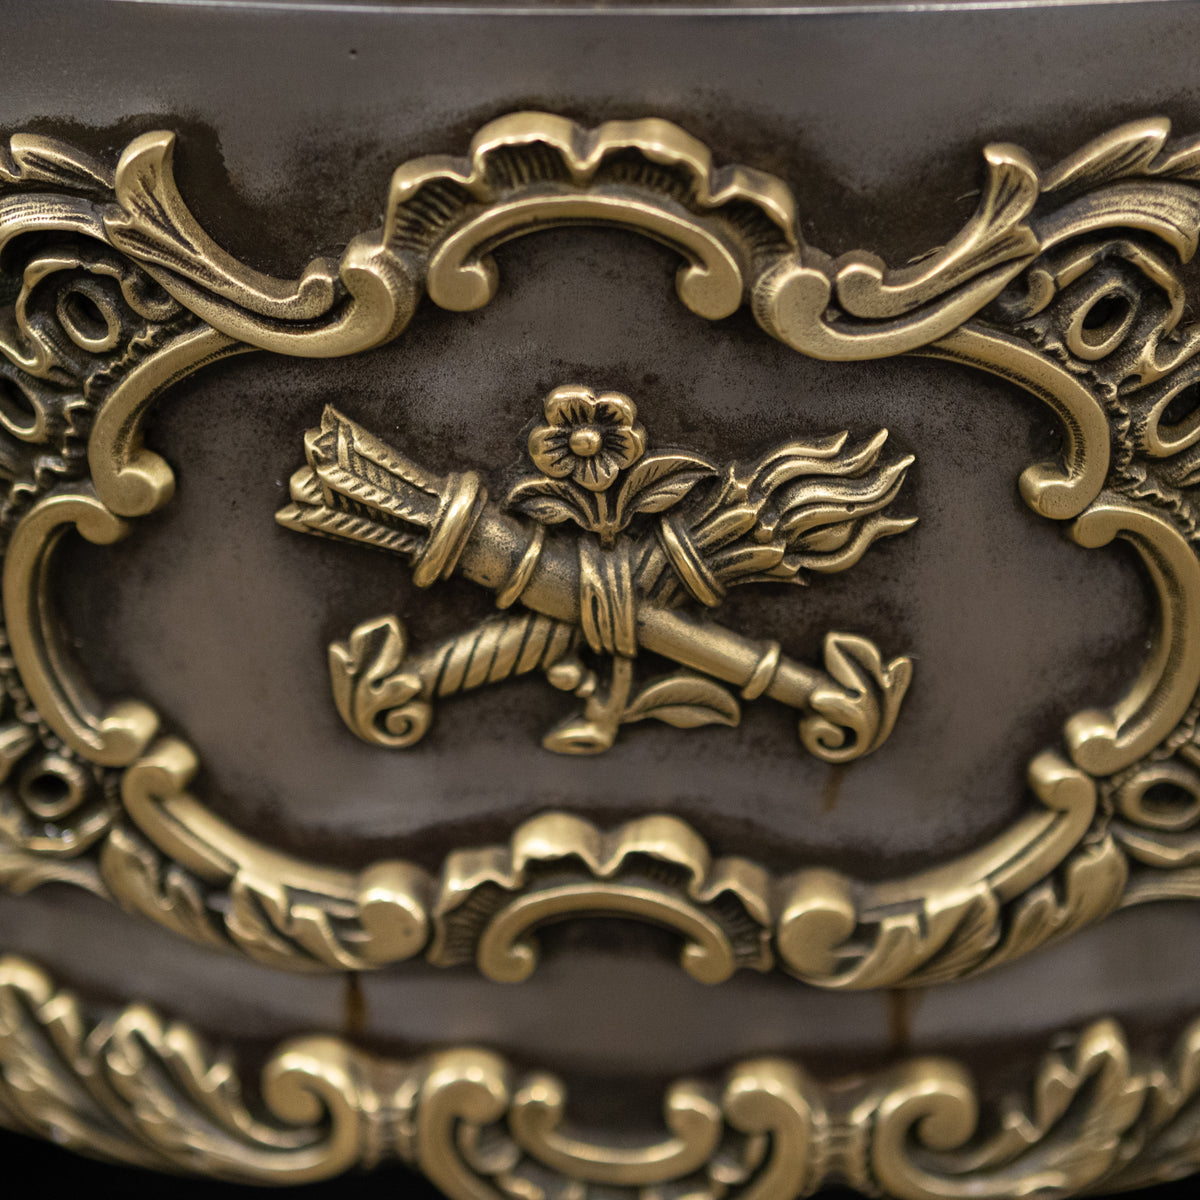 Ornate Antique Polished Cast Iron &amp; Brass Fireplace Insert | The Architectural Forum